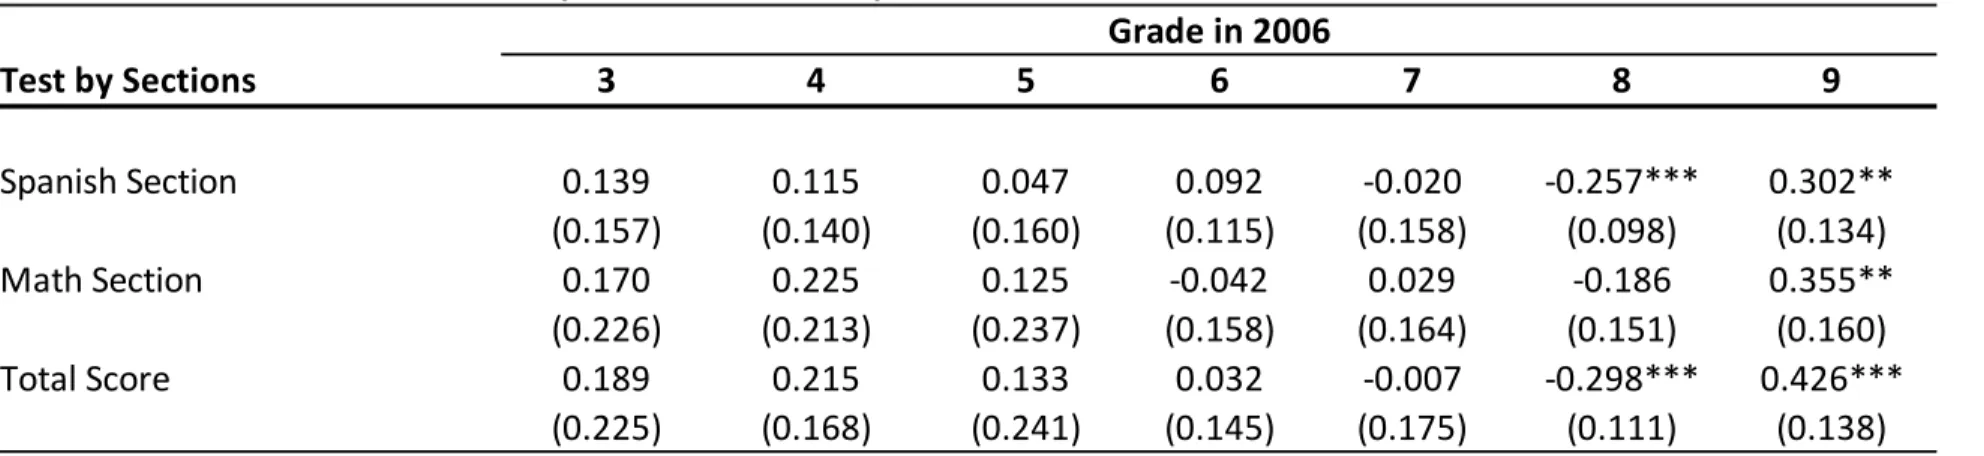 Table 9: Difference in Test Scores by Grade at Follow‐Up Test by Sections 3 4 5 6 7 8 9 Spanish Section 0.139 0.115 0.047 0.092 ‐0.020 ‐0.257*** 0.302** (0.157) (0.140) (0.160) (0.115) (0.158) (0.098) (0.134) Math Section 0.170 0.225 0.125 ‐0.042 0.029 ‐0.